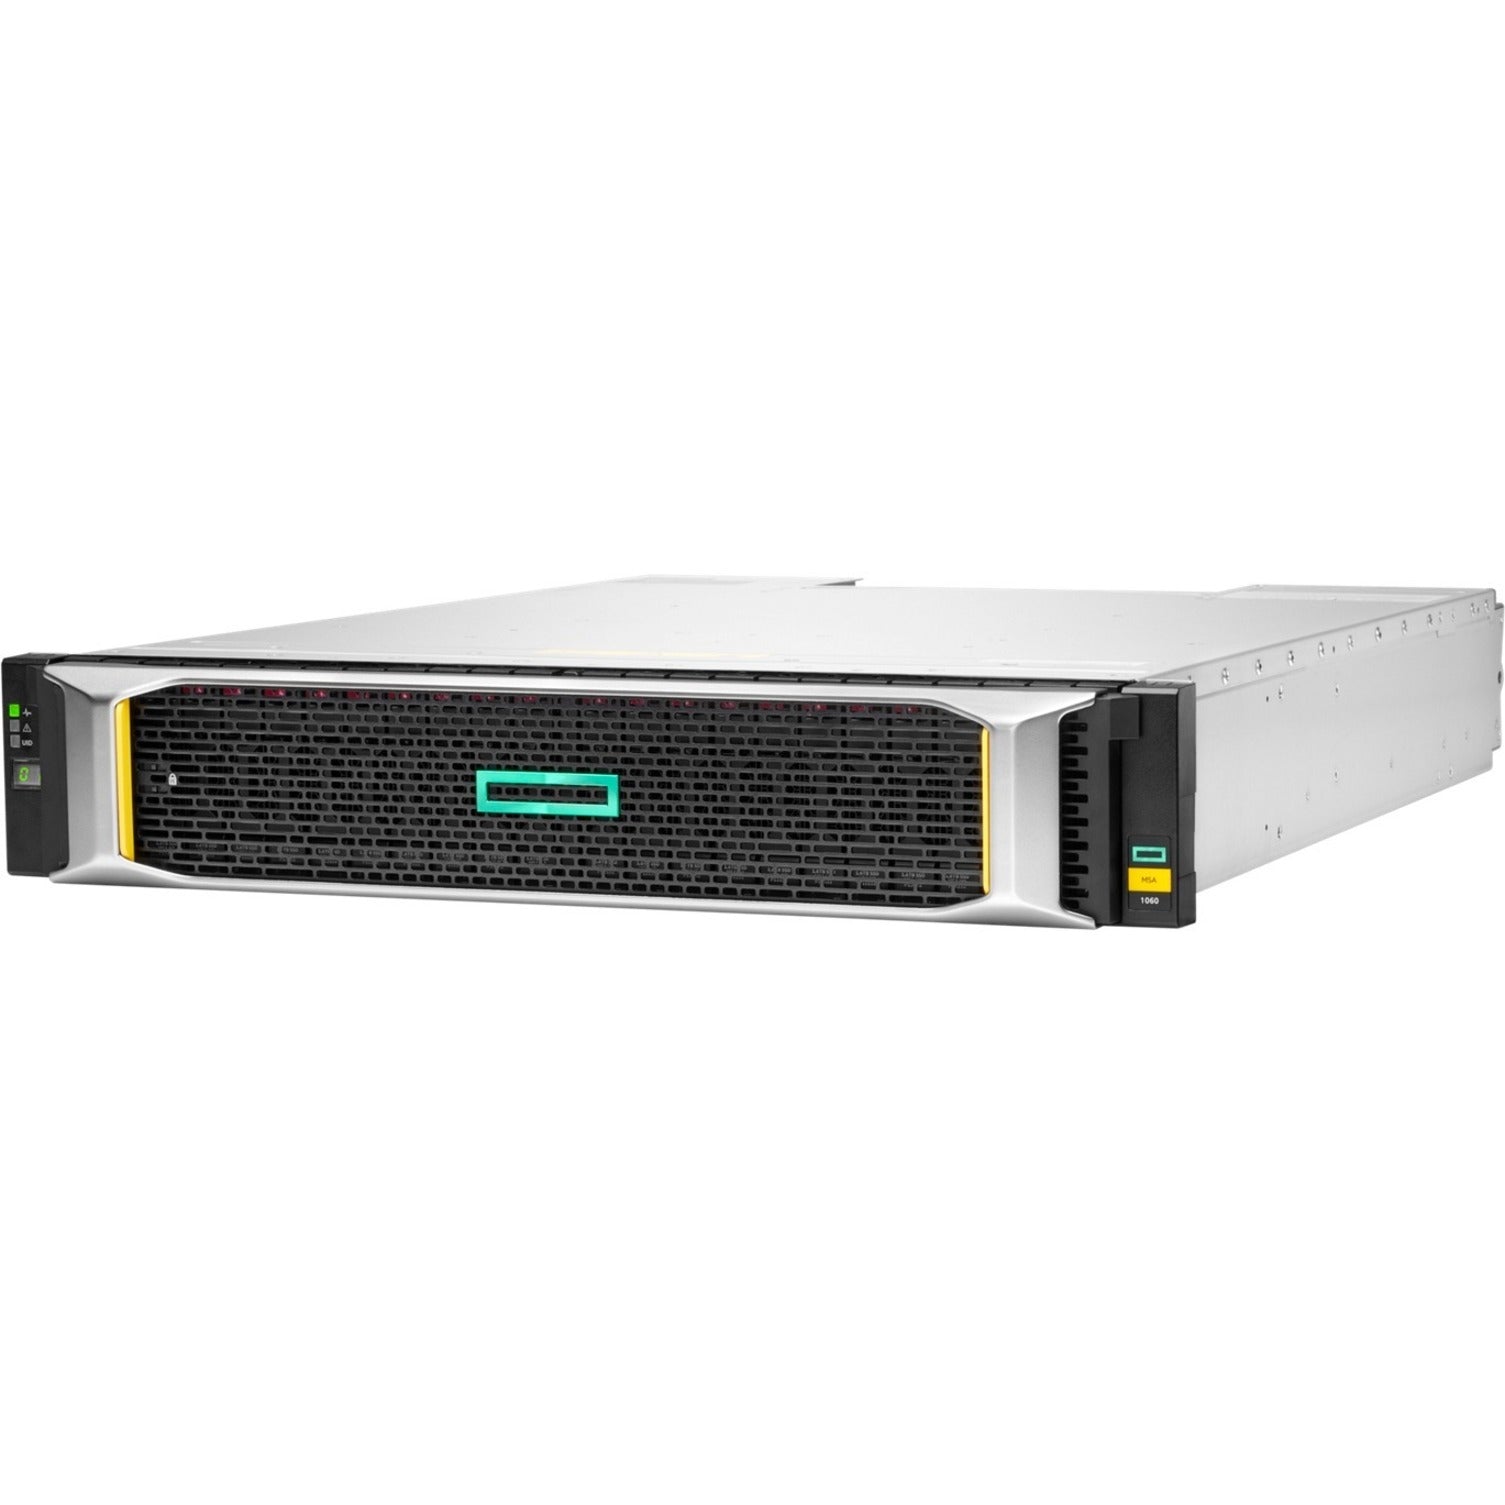 HPE R0Q87B MSA 1060 12Gb SAS SFF Storage, Clustering Supported, 24 Drive Support